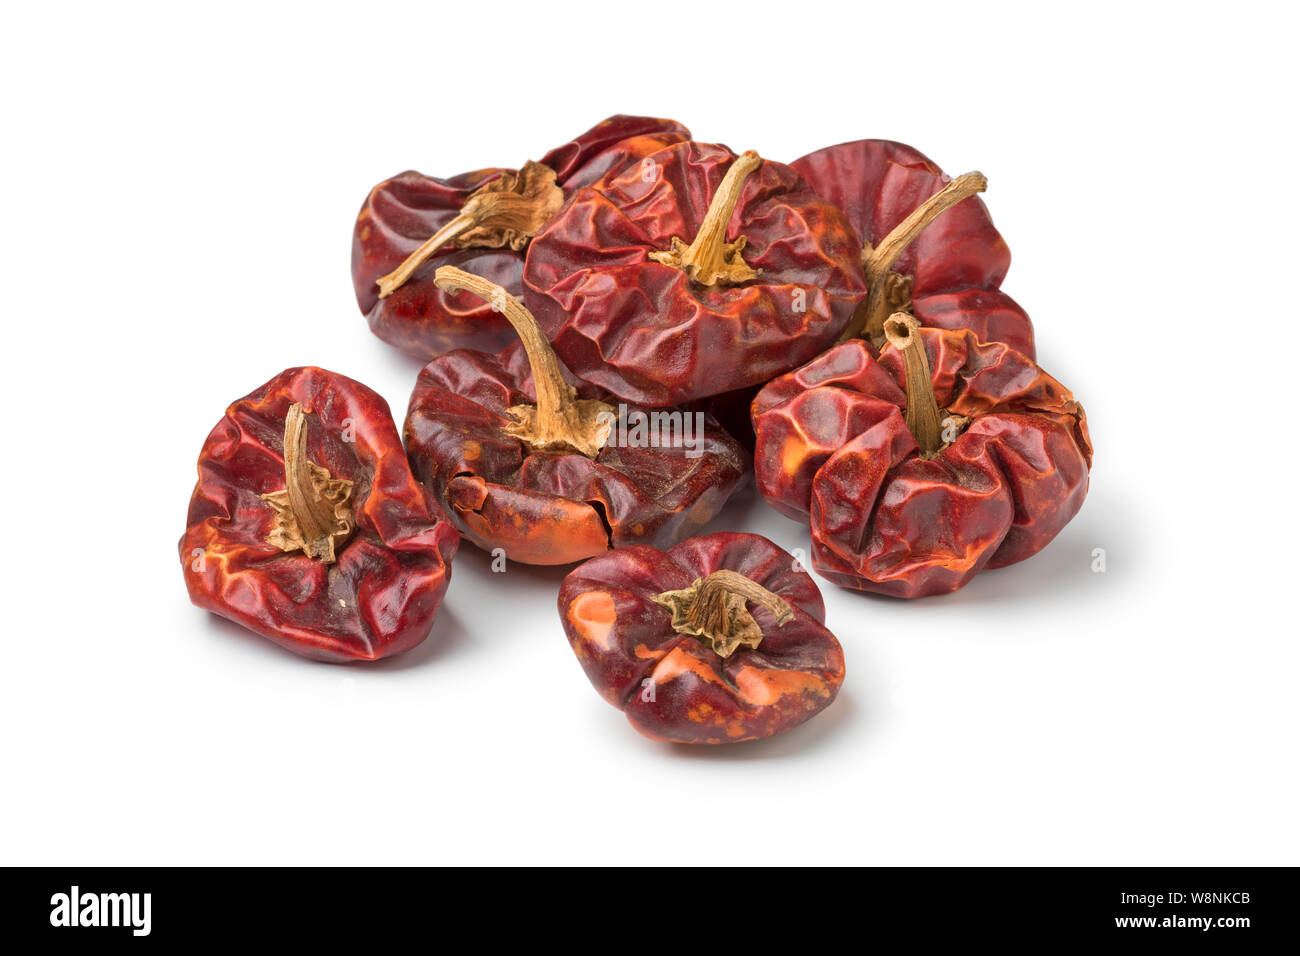 Heap of dried red bell peppers isolated on white background Stock Photo